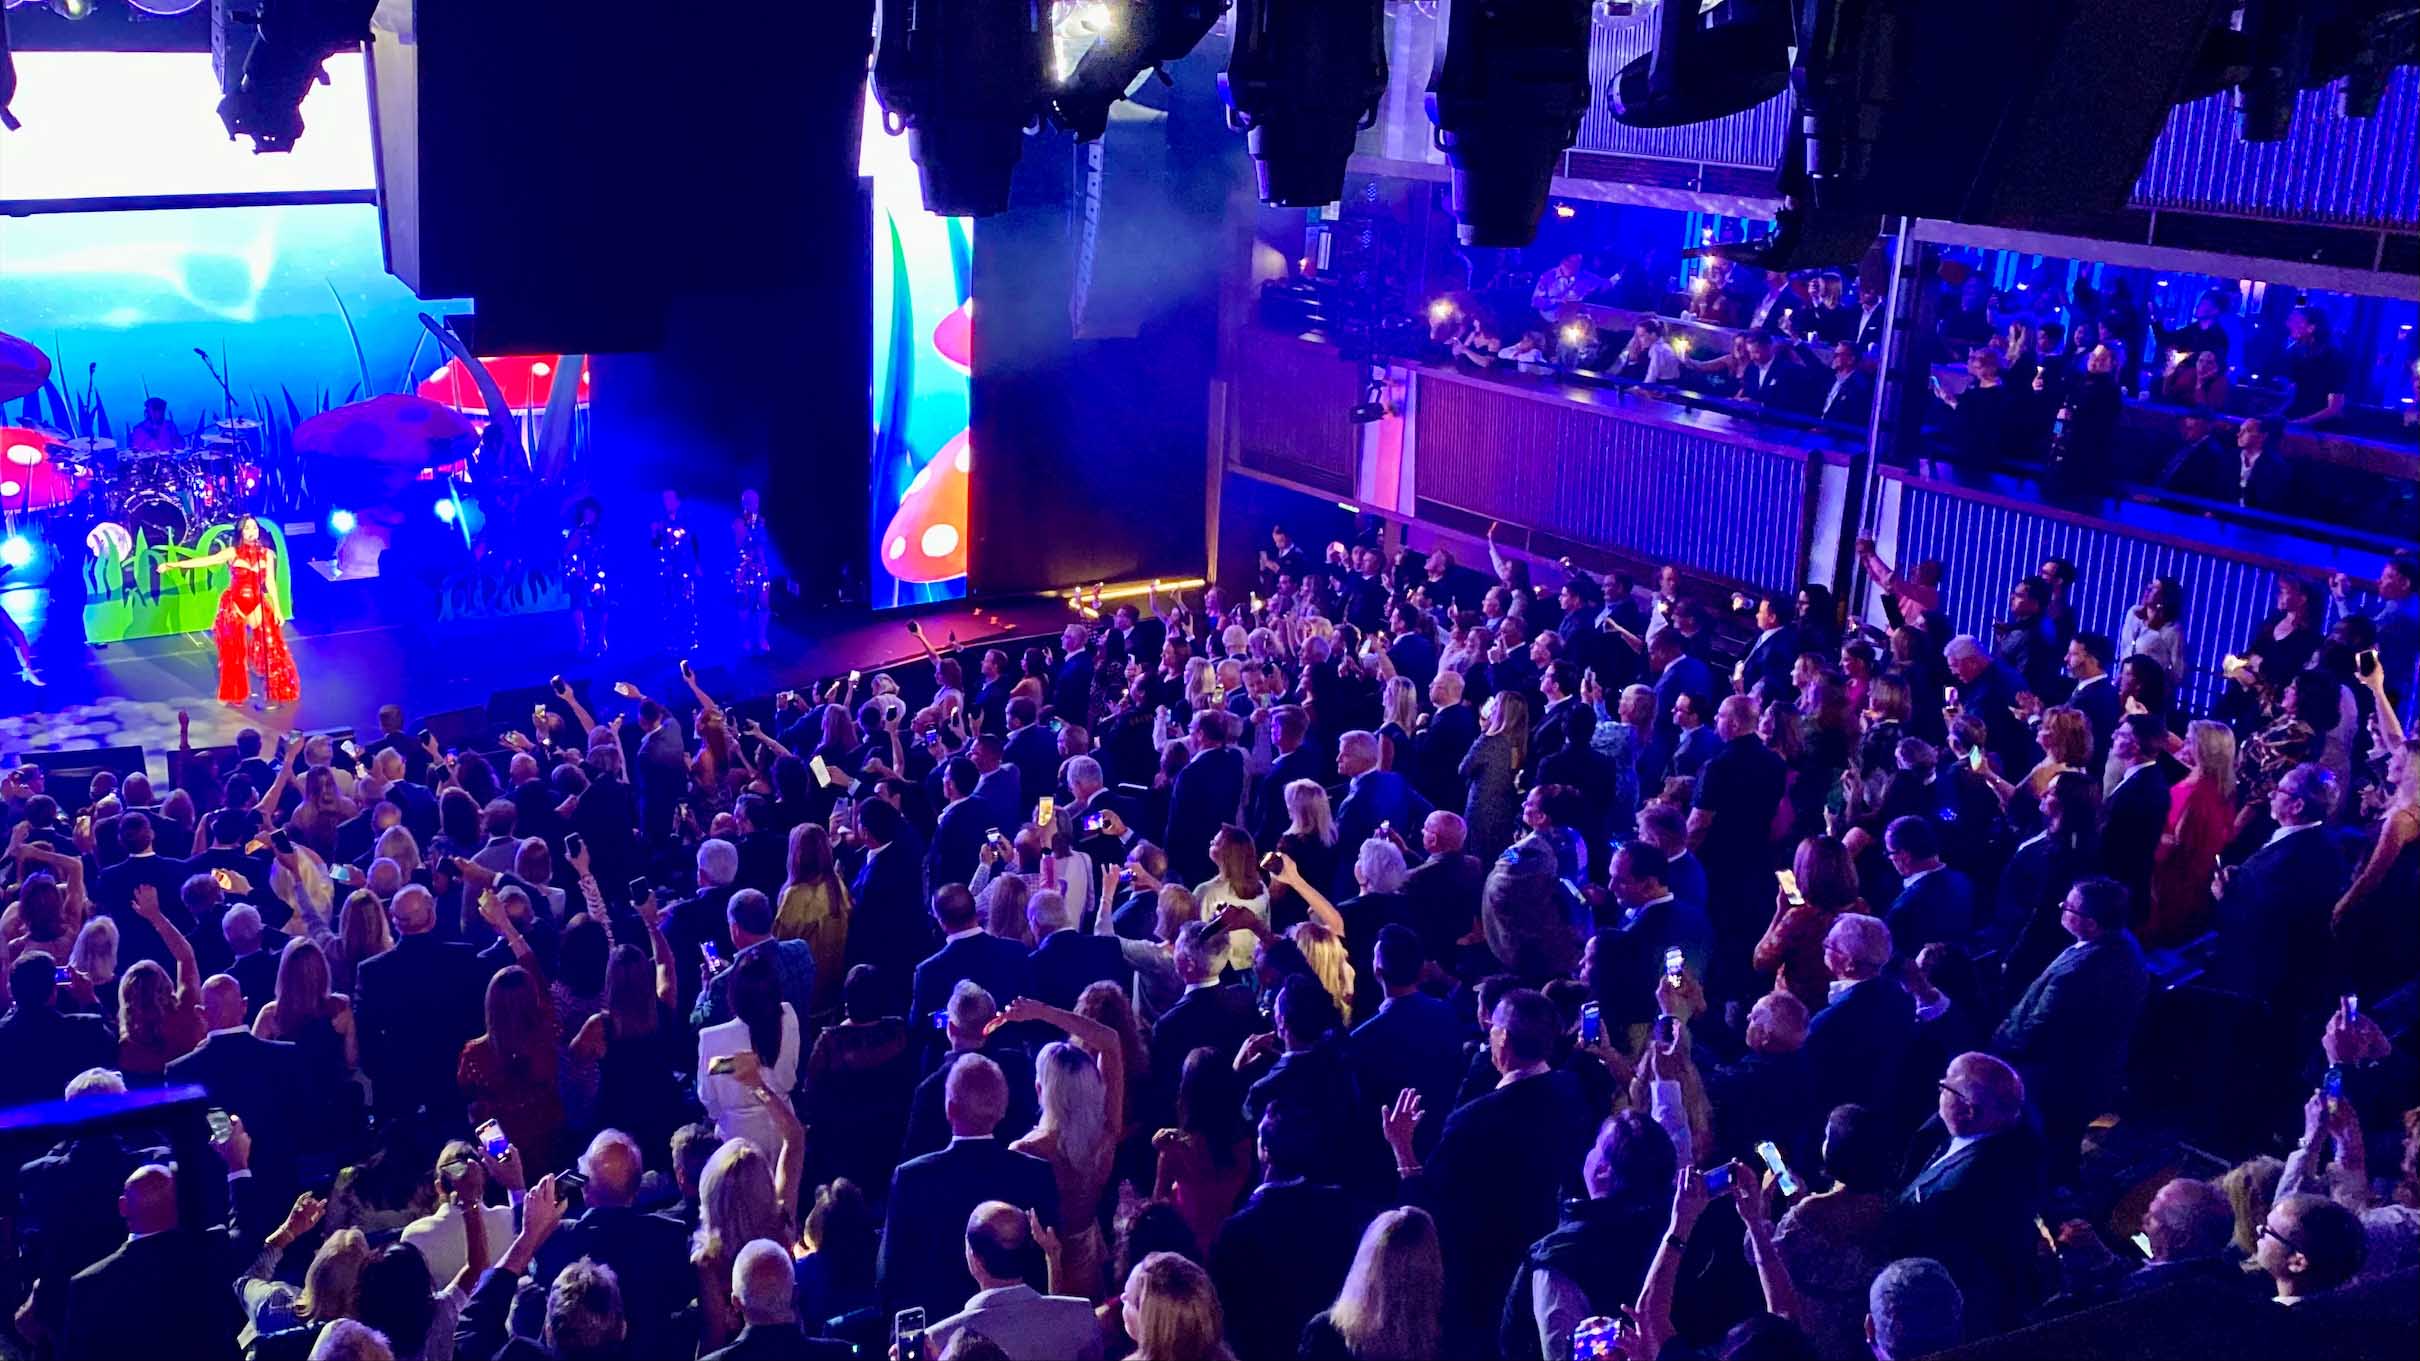 Guests onboard the Norwegian Prima took to their feet during a concert by the Prima's godmother, recording artist Katy Perry.